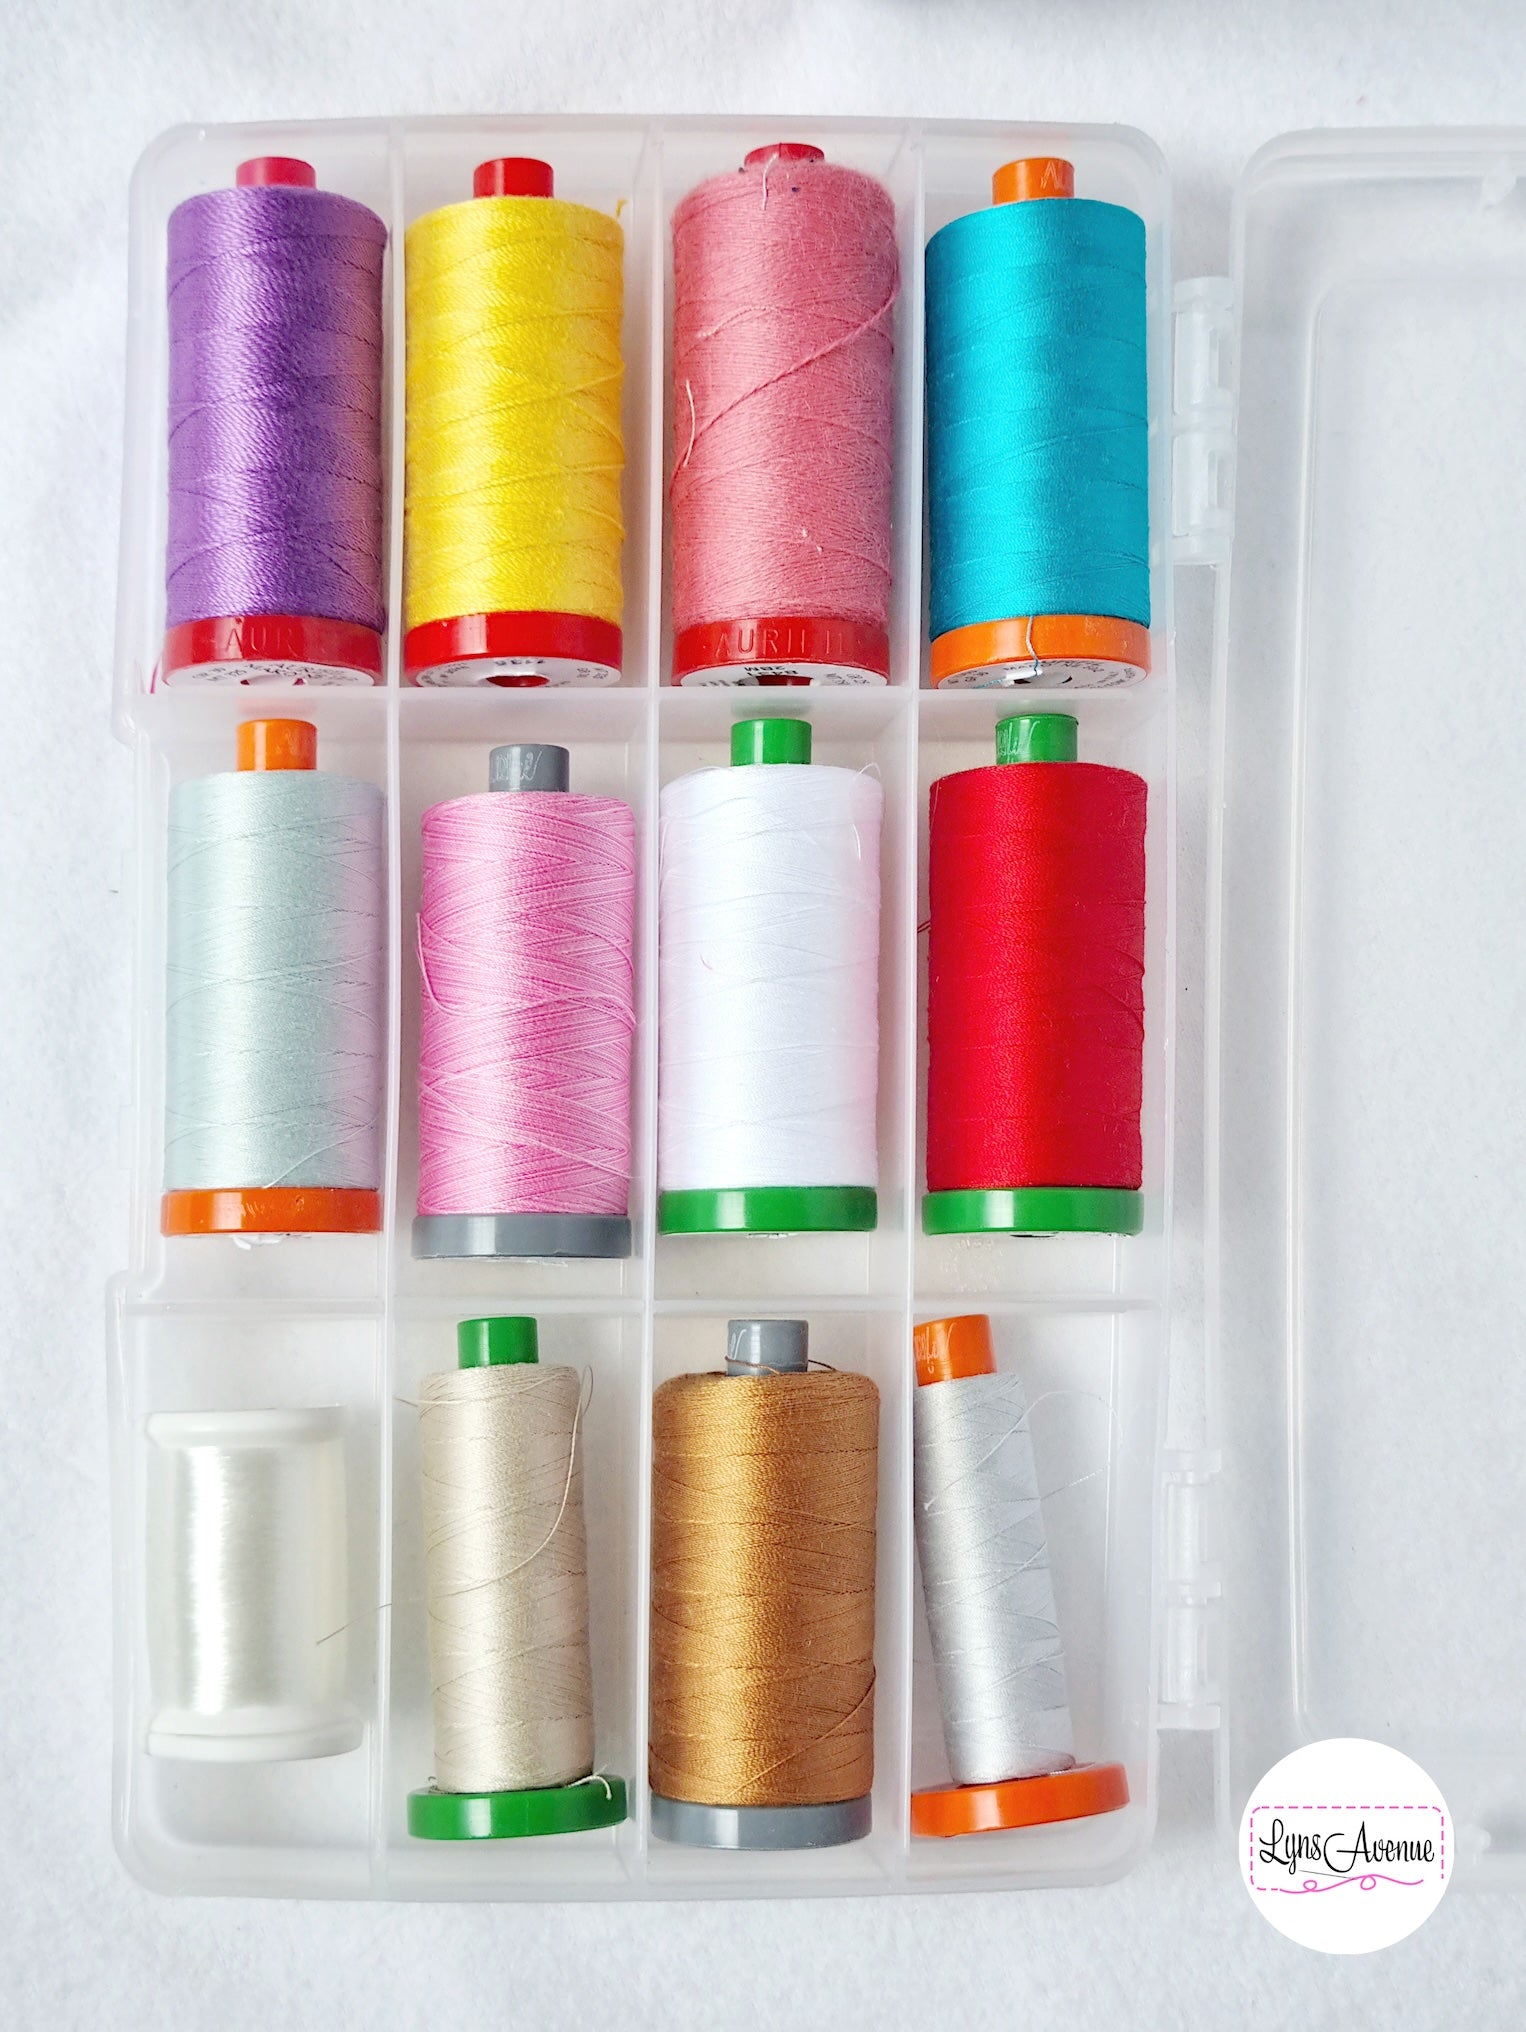 Image of plastic storage container with dividers showing spools of Aurifil threads in different colours